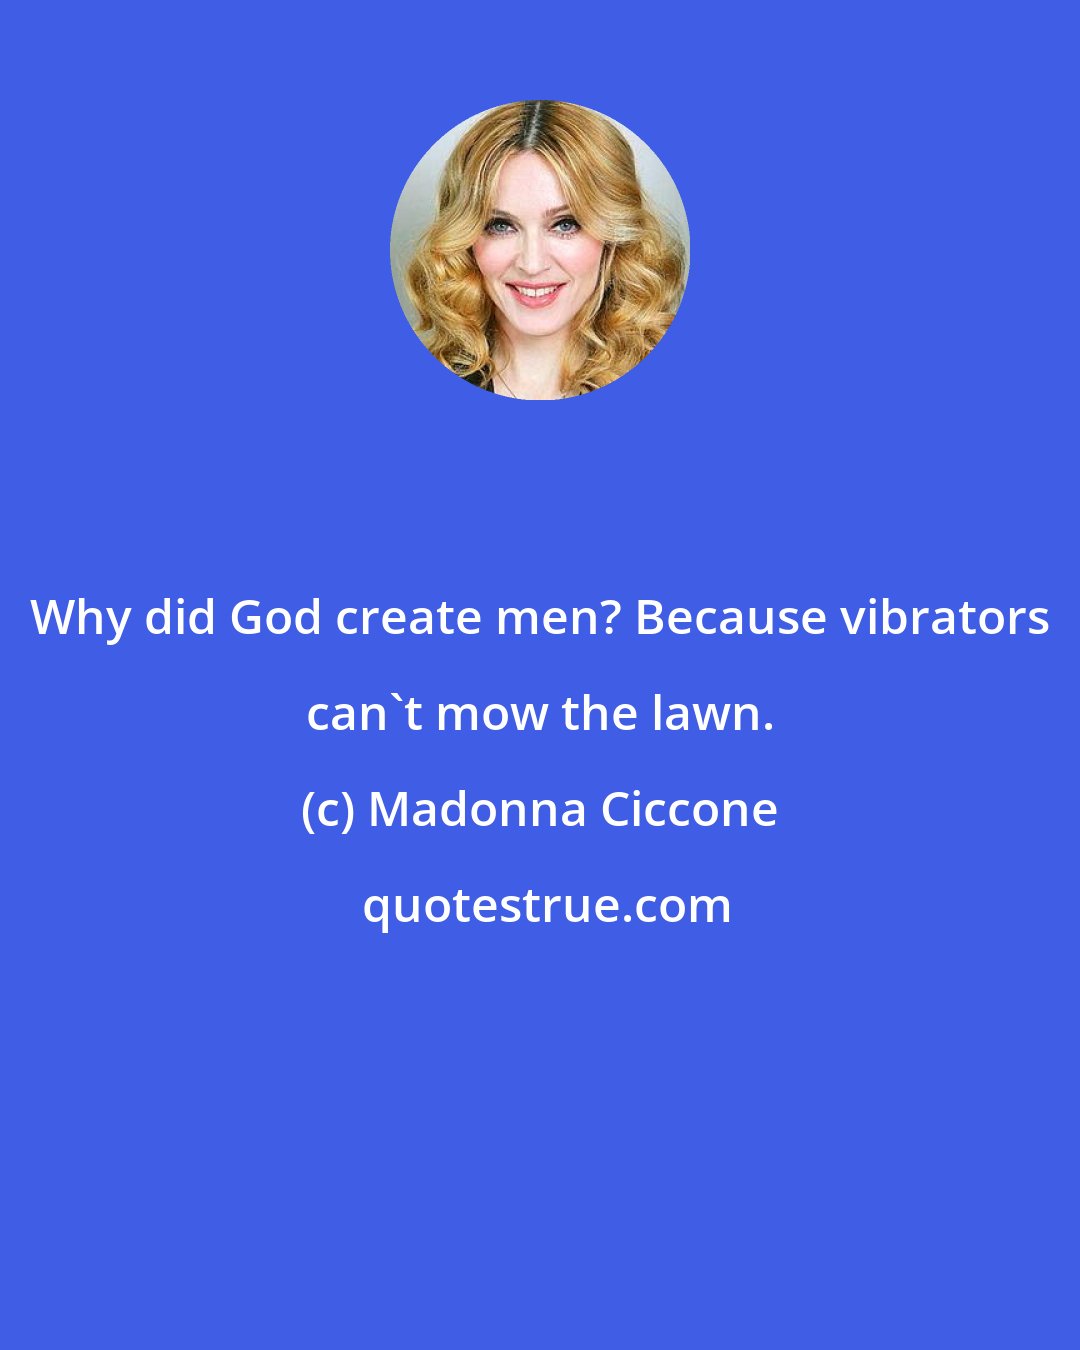 Madonna Ciccone: Why did God create men? Because vibrators can't mow the lawn.